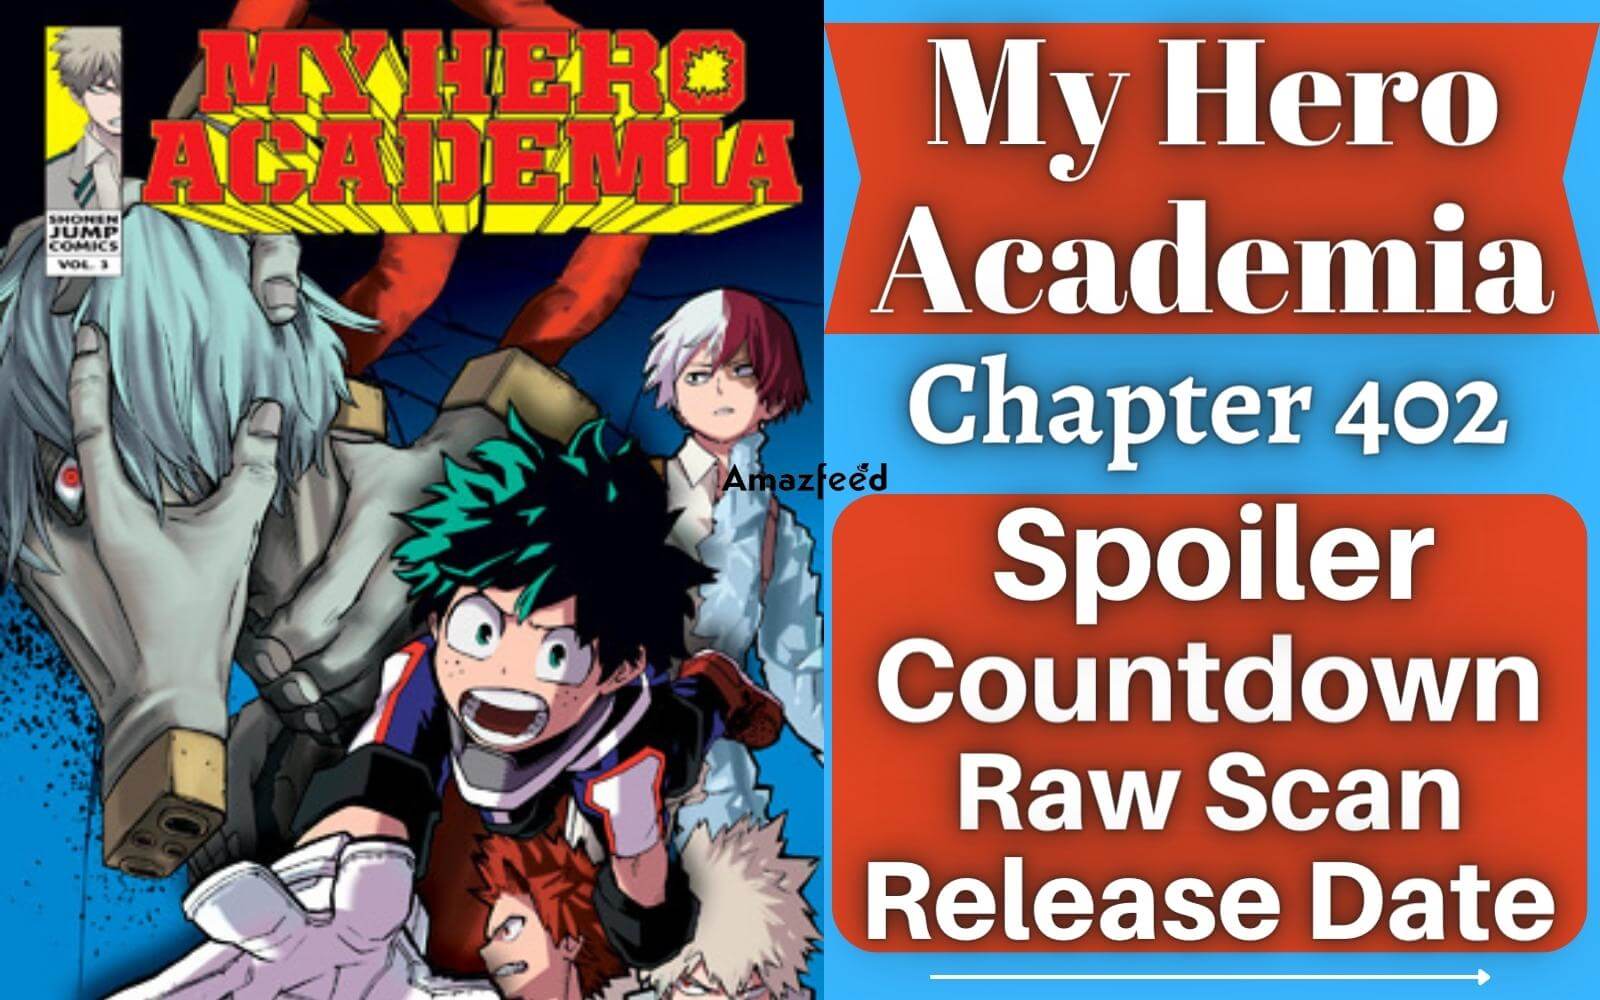 greenscreen my hero academia chapter 402 spoiler review! Let me know